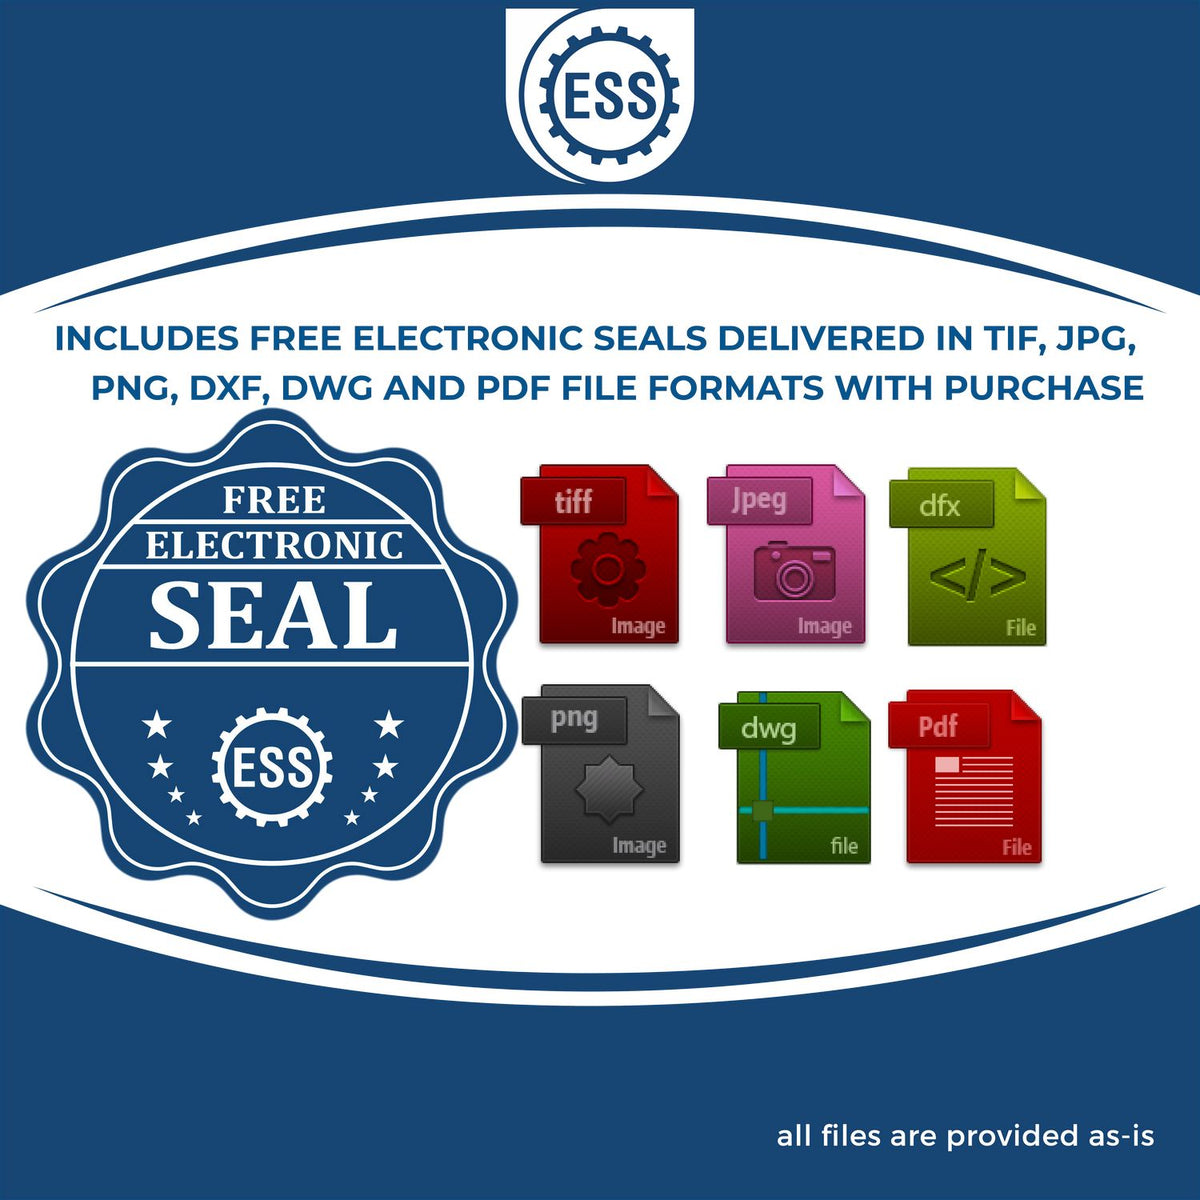 An infographic for the free electronic seal for the Long Reach Massachusetts PE Seal illustrating the different file type icons such as DXF, DWG, TIF, JPG and PNG.